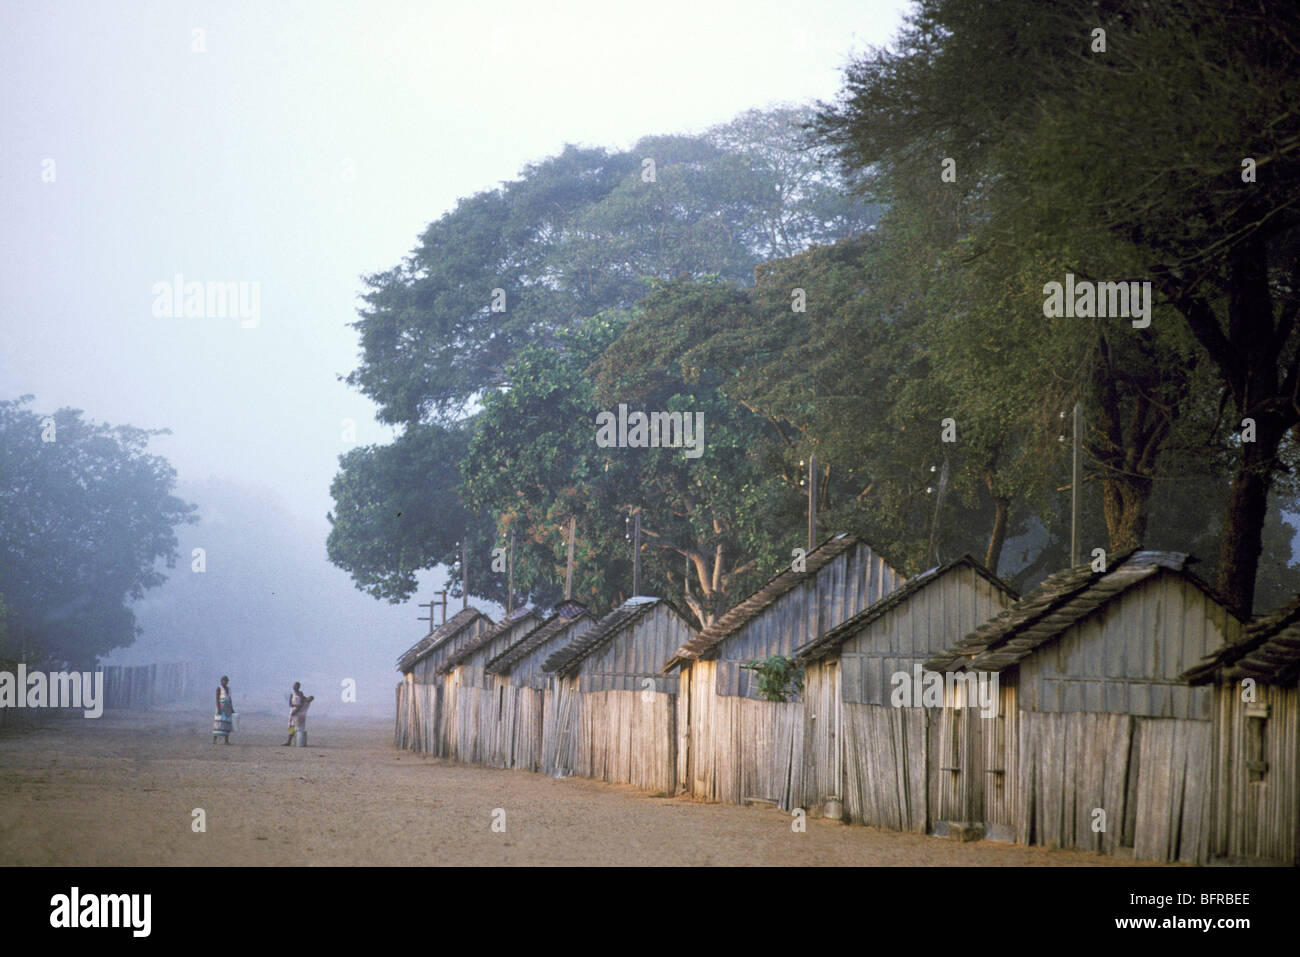 A row of wooden huts on a misty morning Stock Photo